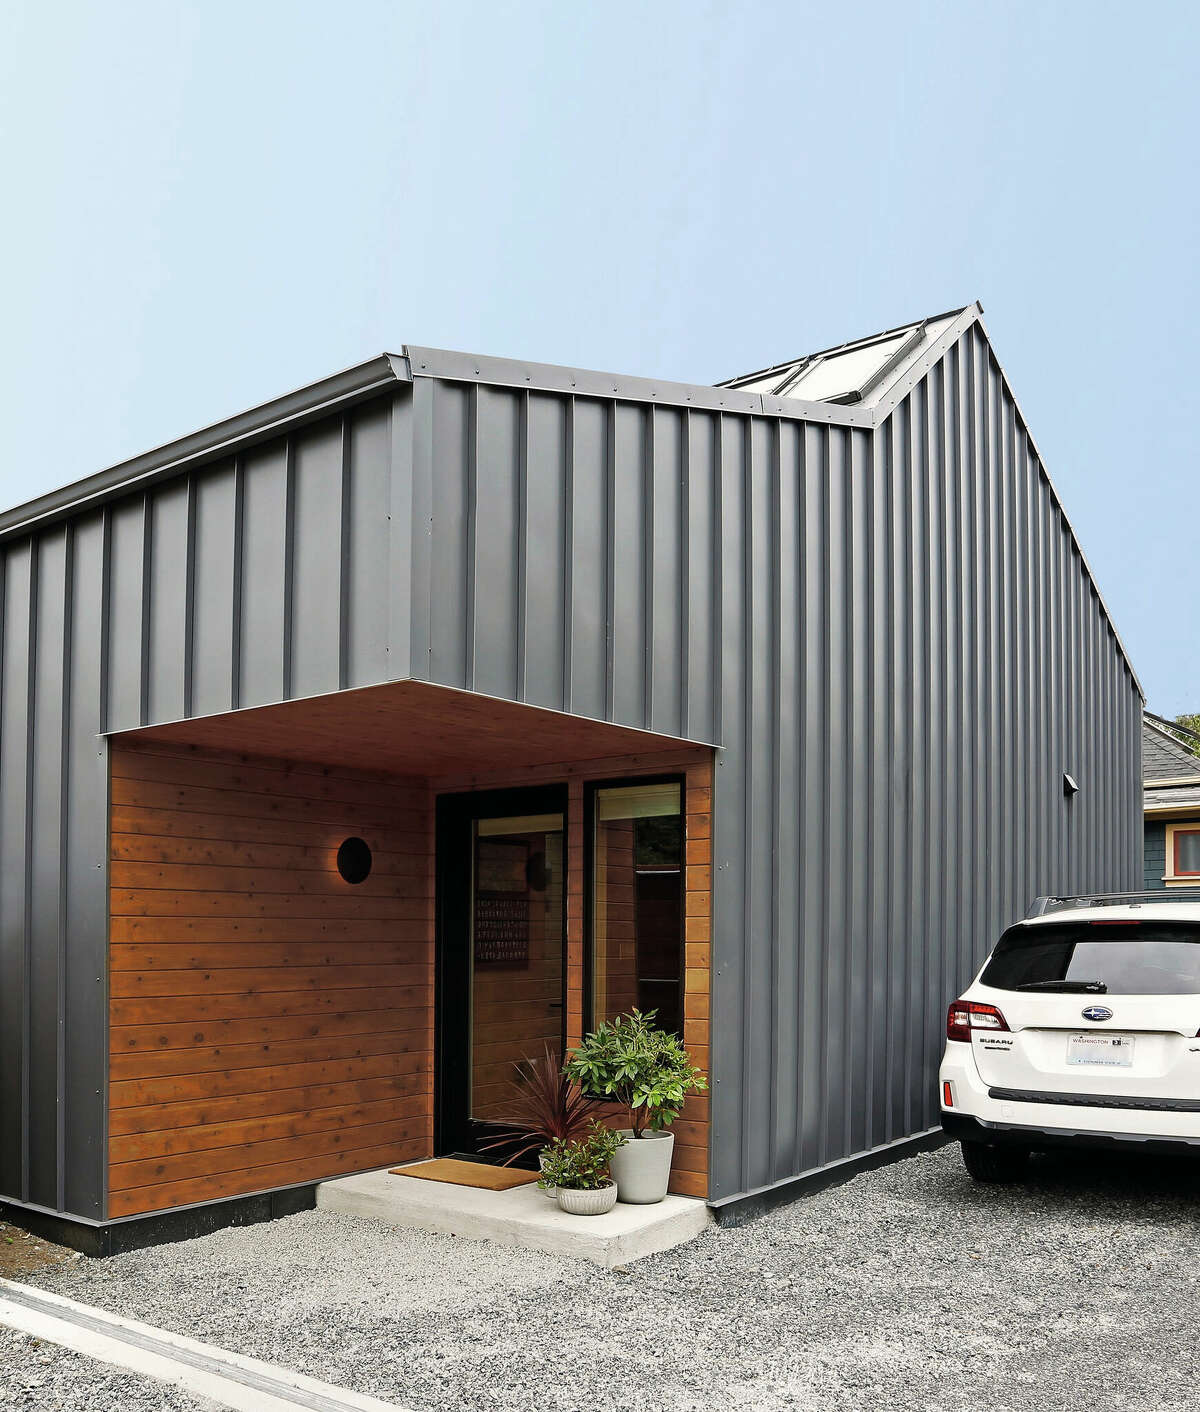 An accessory dwelling unit is a small home separate from a main house. 